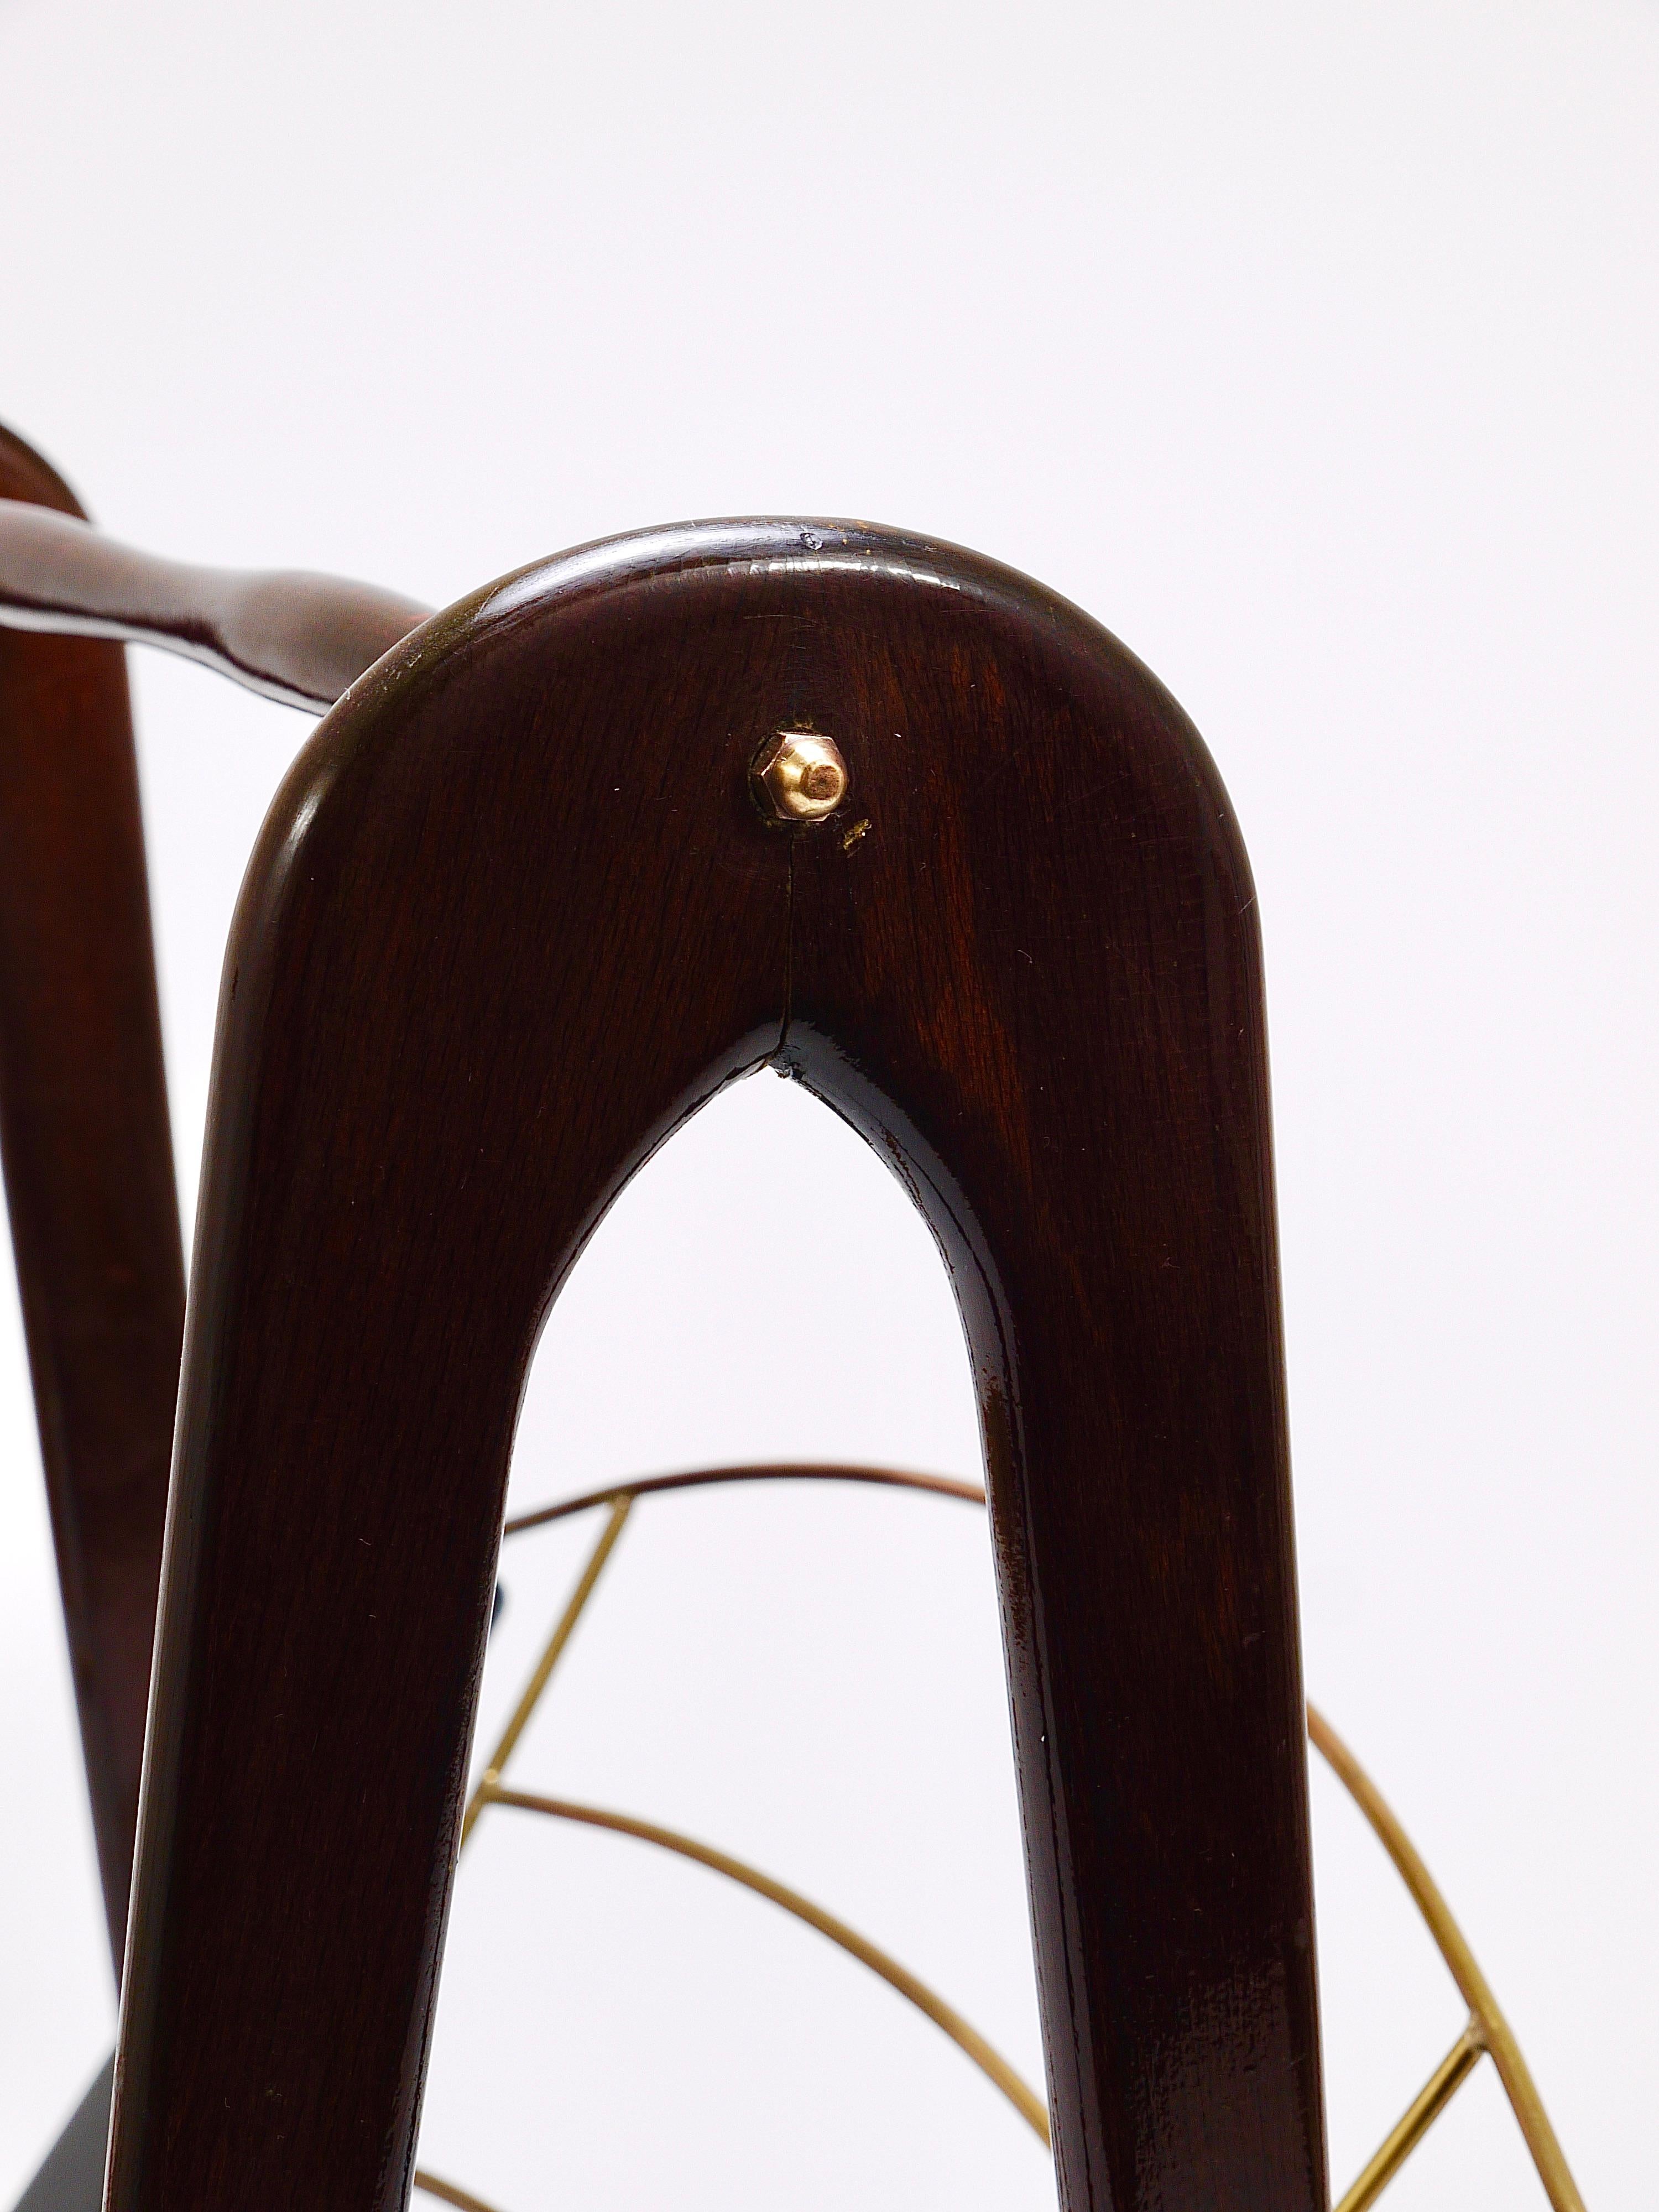 Cesare Lacca Midcentury Magazine Rack, Mahogany & Brass, Italy, 1950s For Sale 8